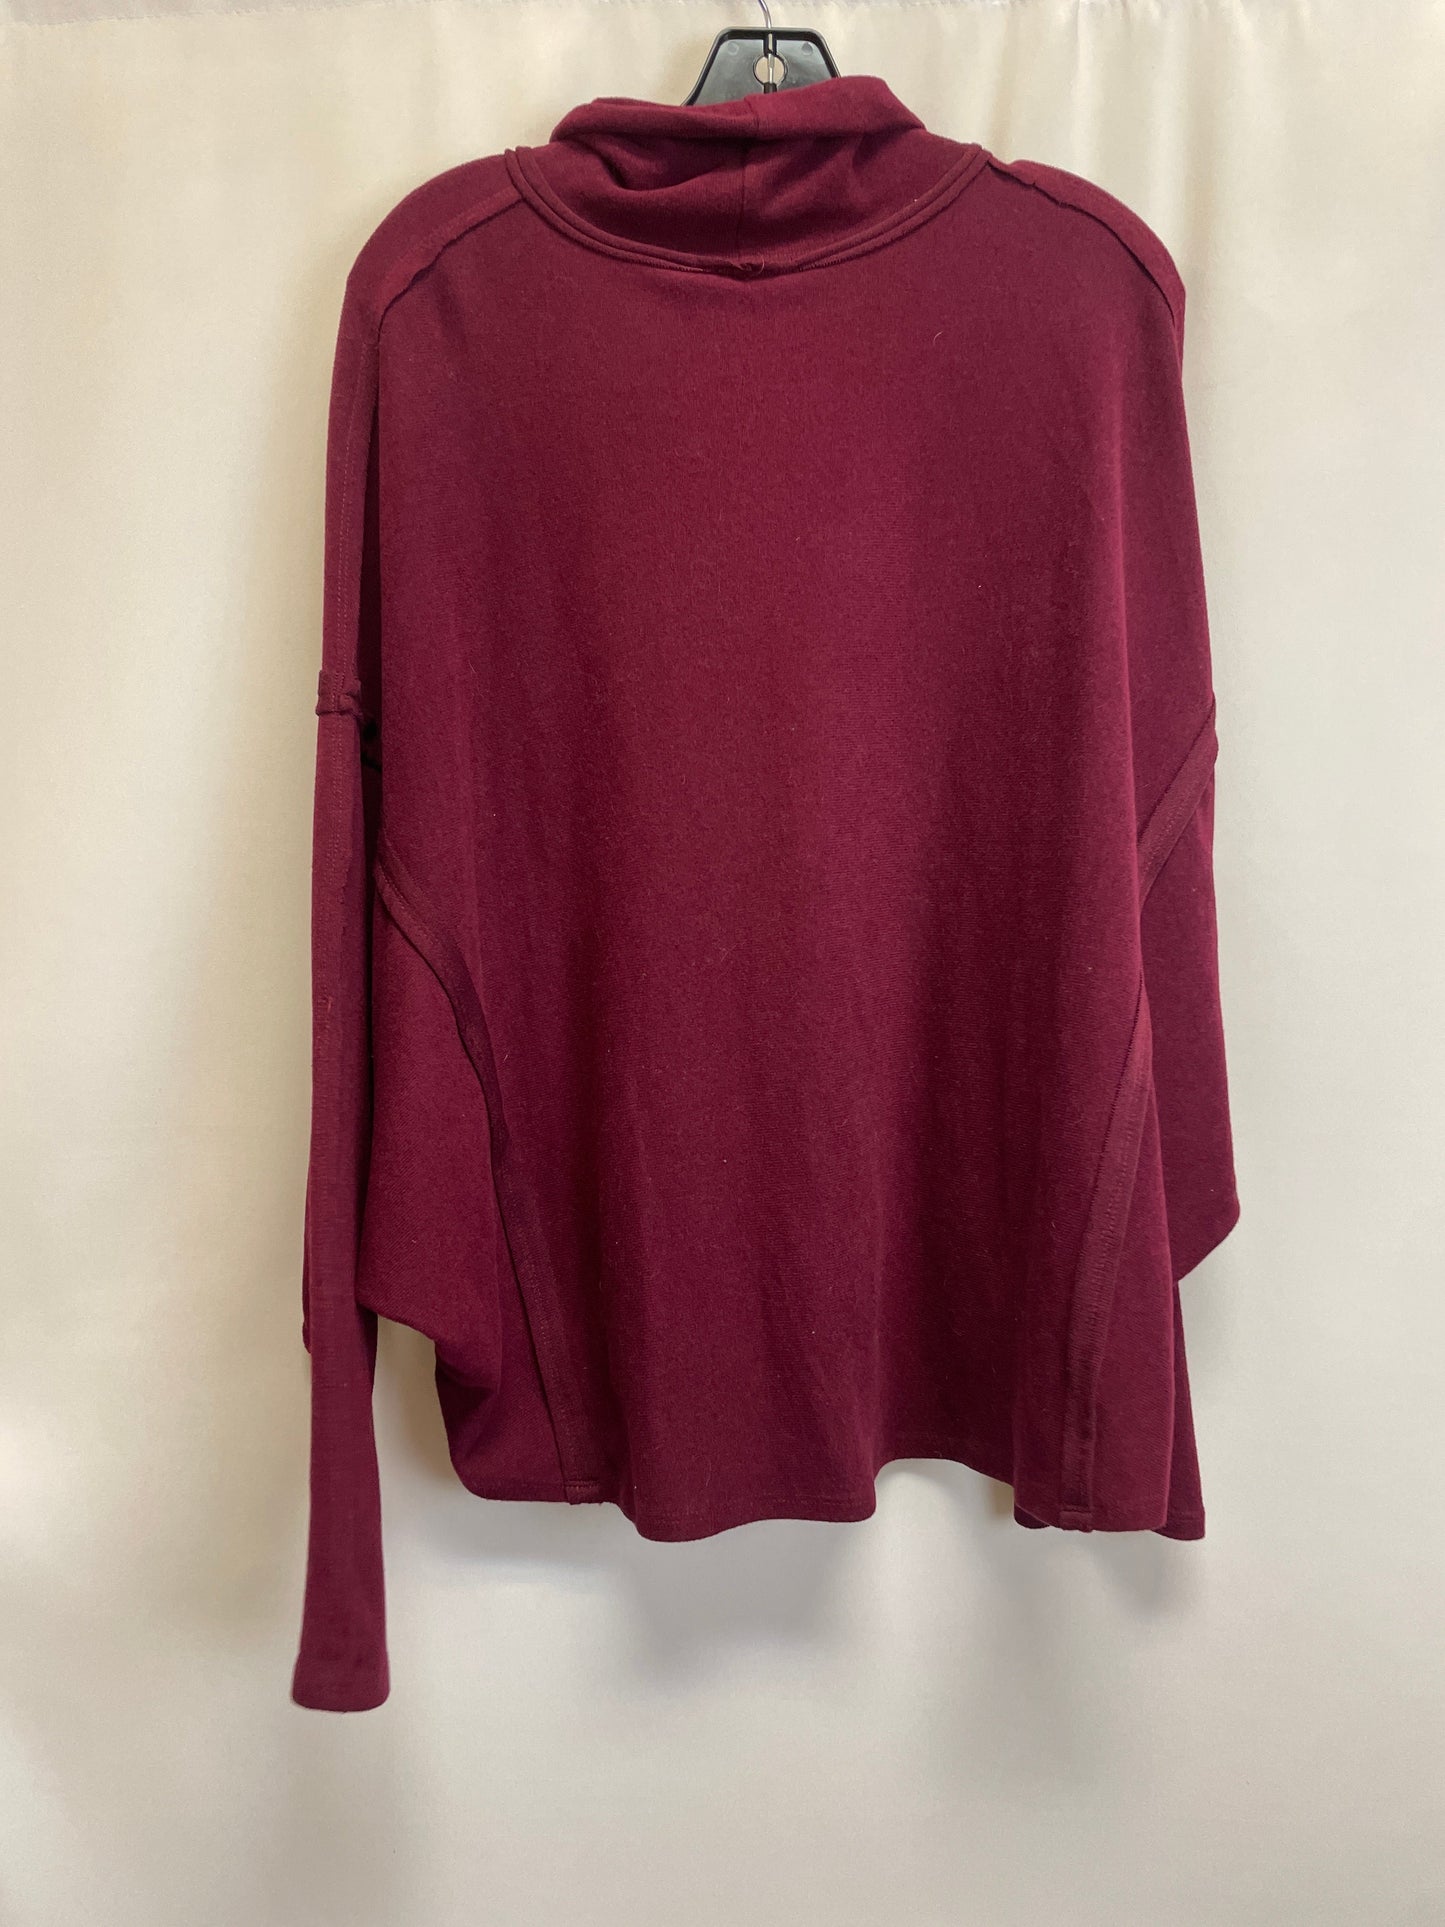 Top Long Sleeve By Umgee  Size: S